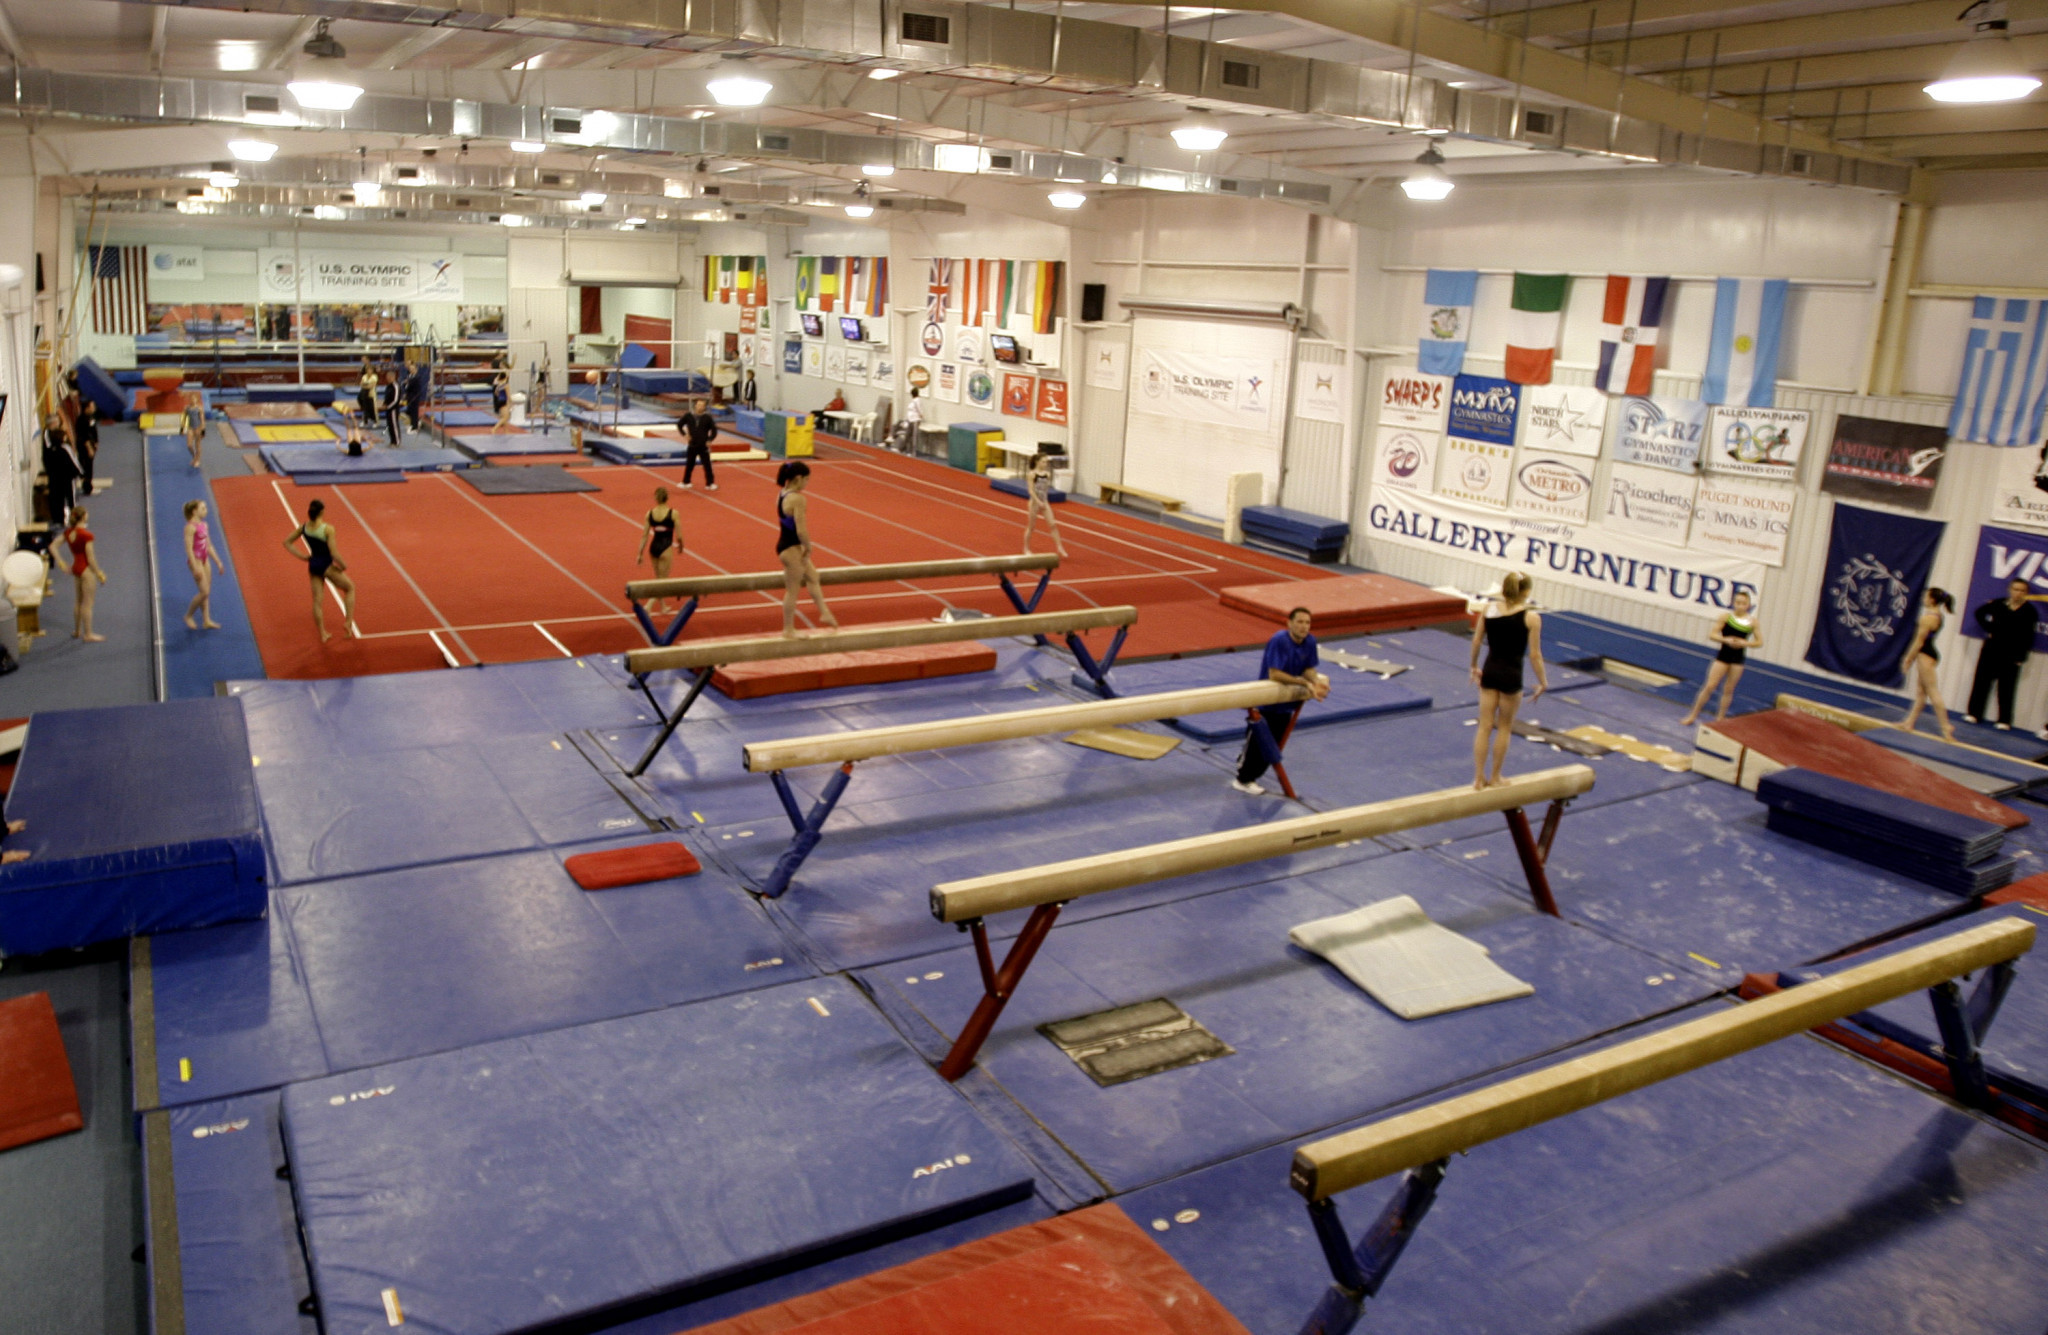 USA Gymnastics terminates agreement with training facility at centre of sexual abuse scandal